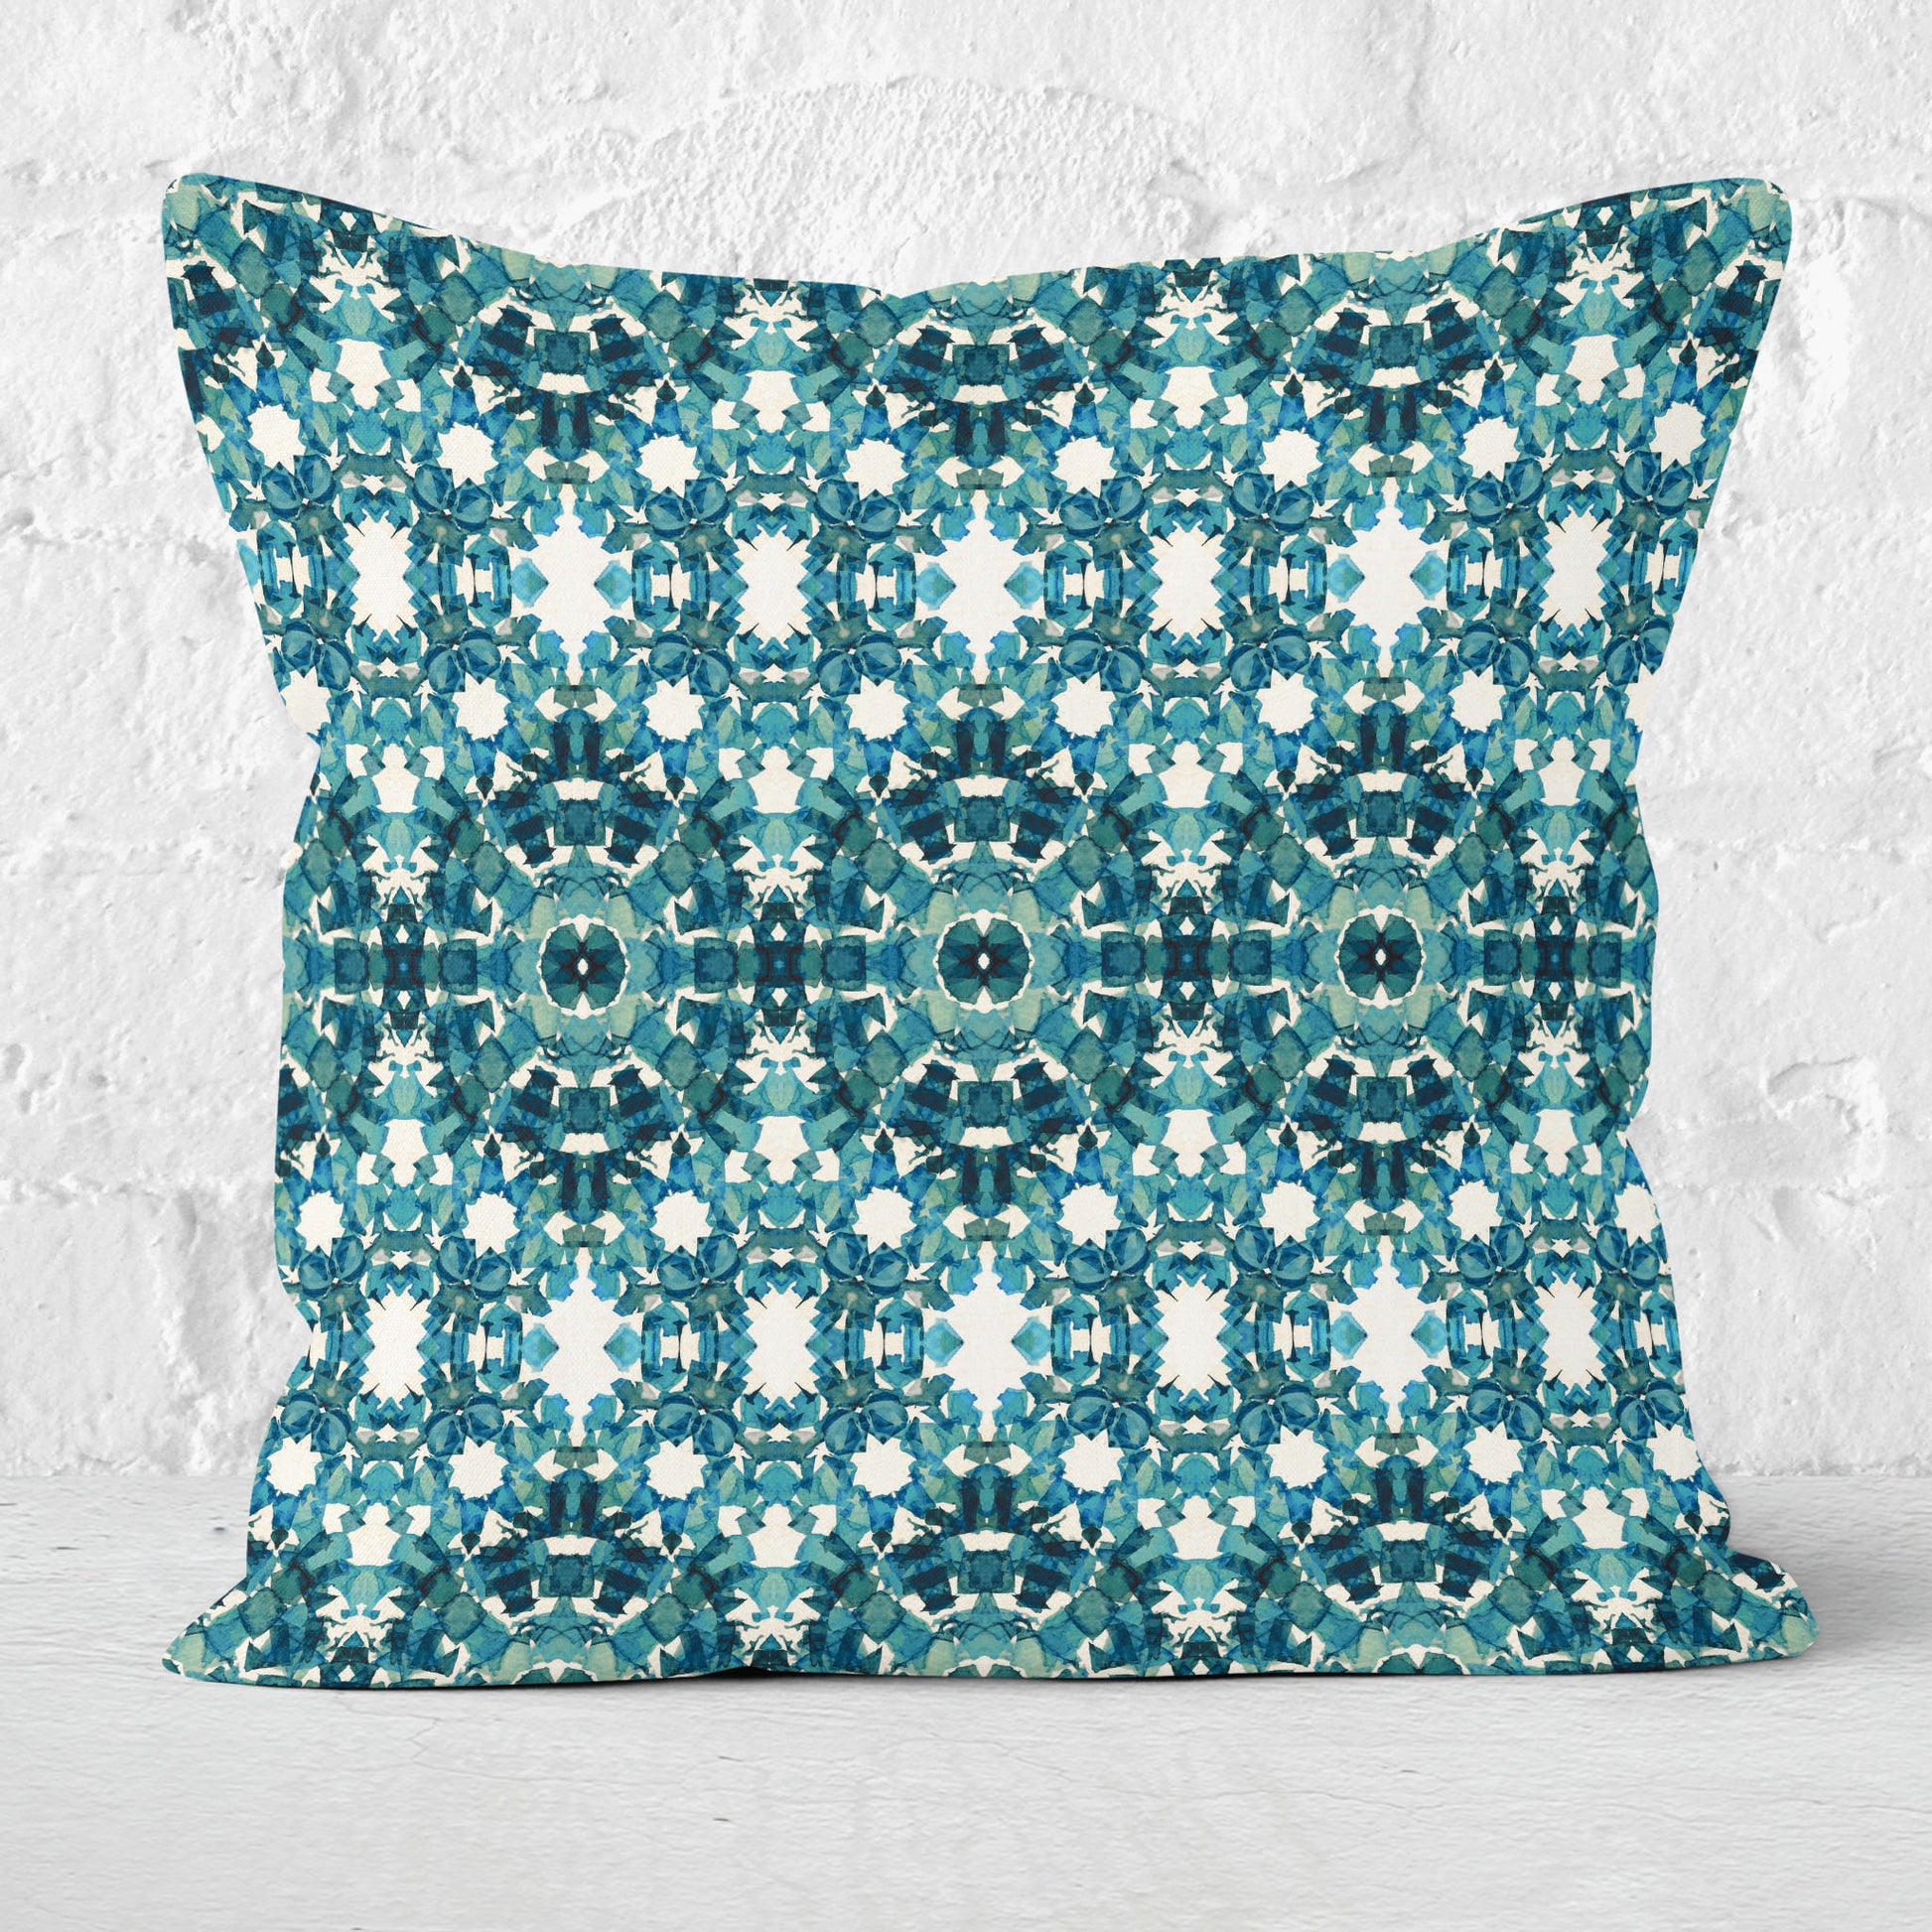 Square throw pillow featuring an abstract teal pattern, sitting against a white brick wall